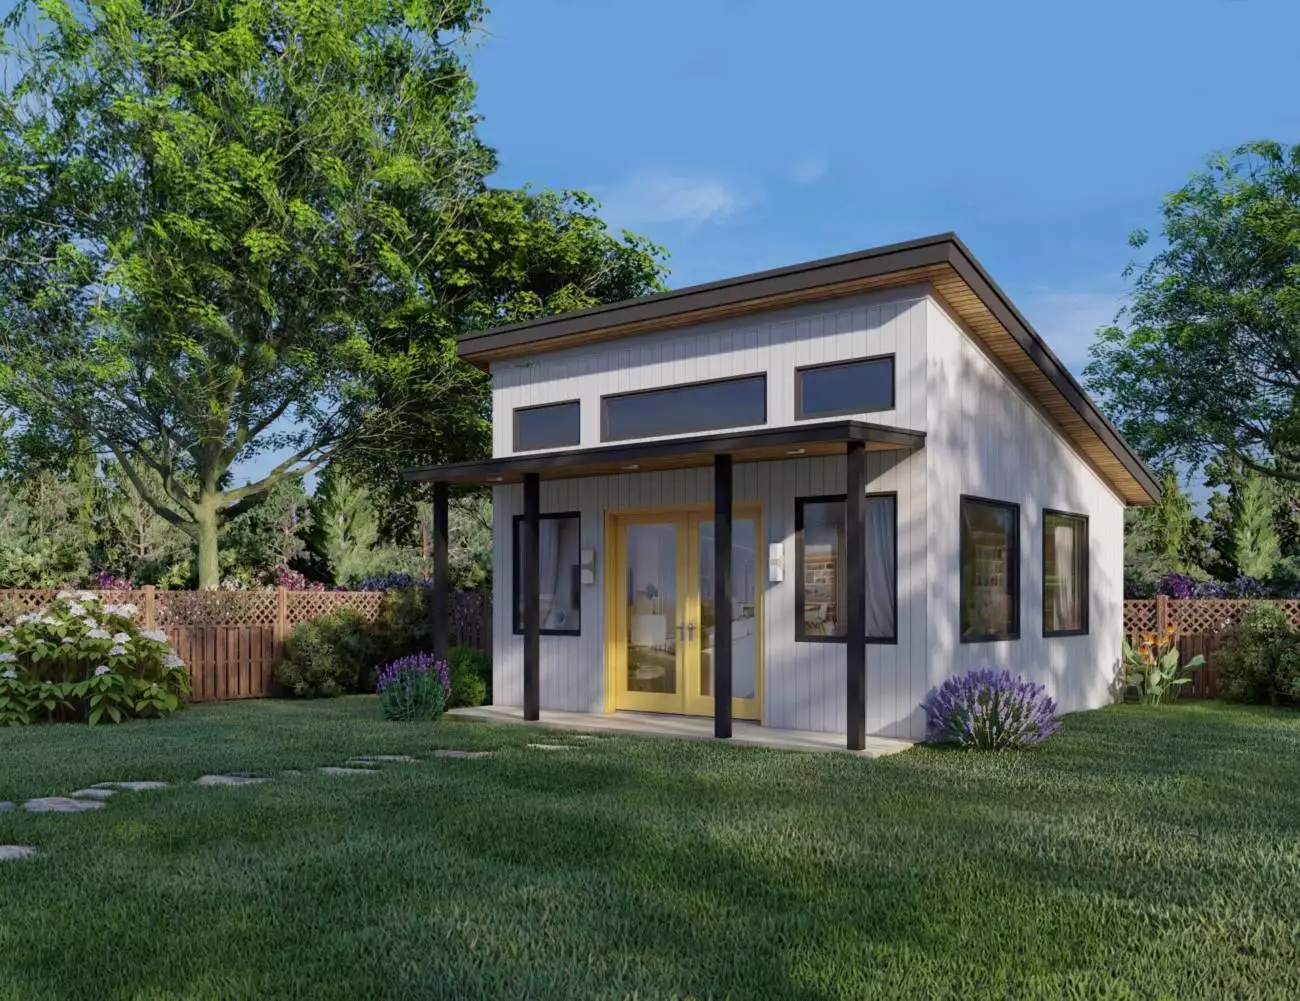 Computer rendering of The Modern house by Mighty Small Homes.